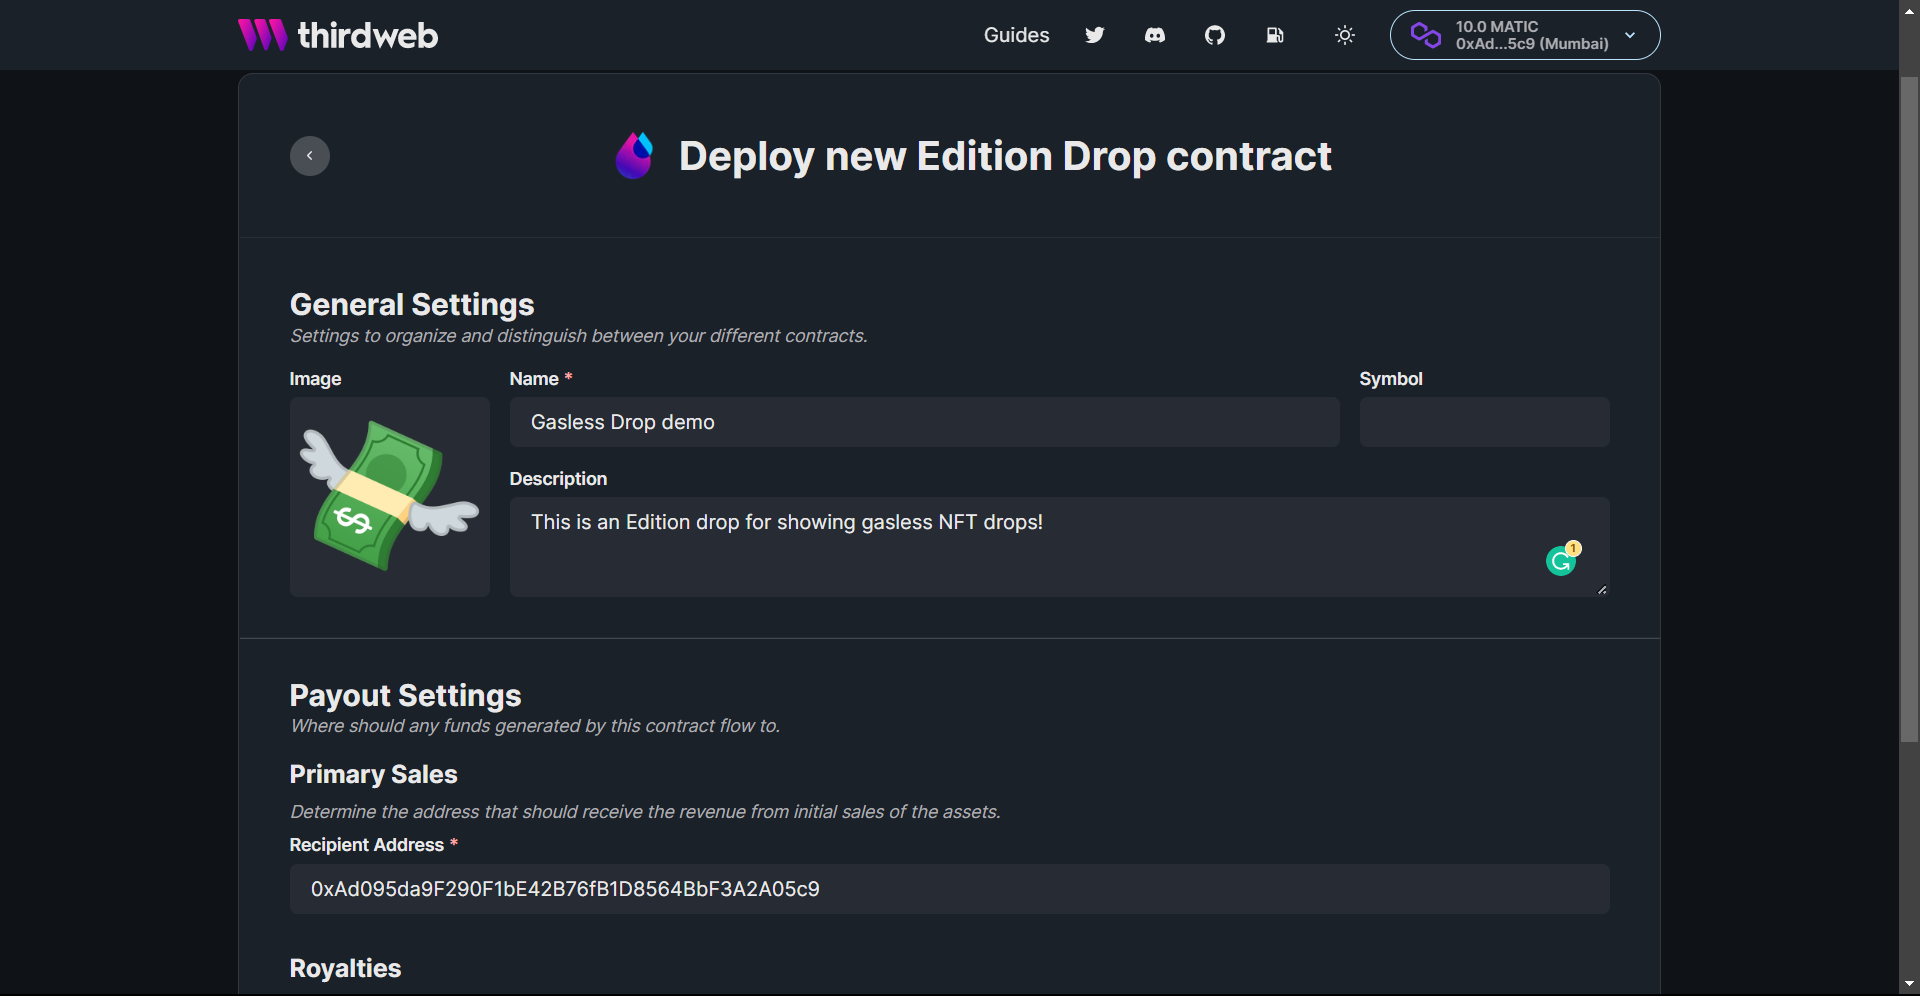 New Edition drop contract